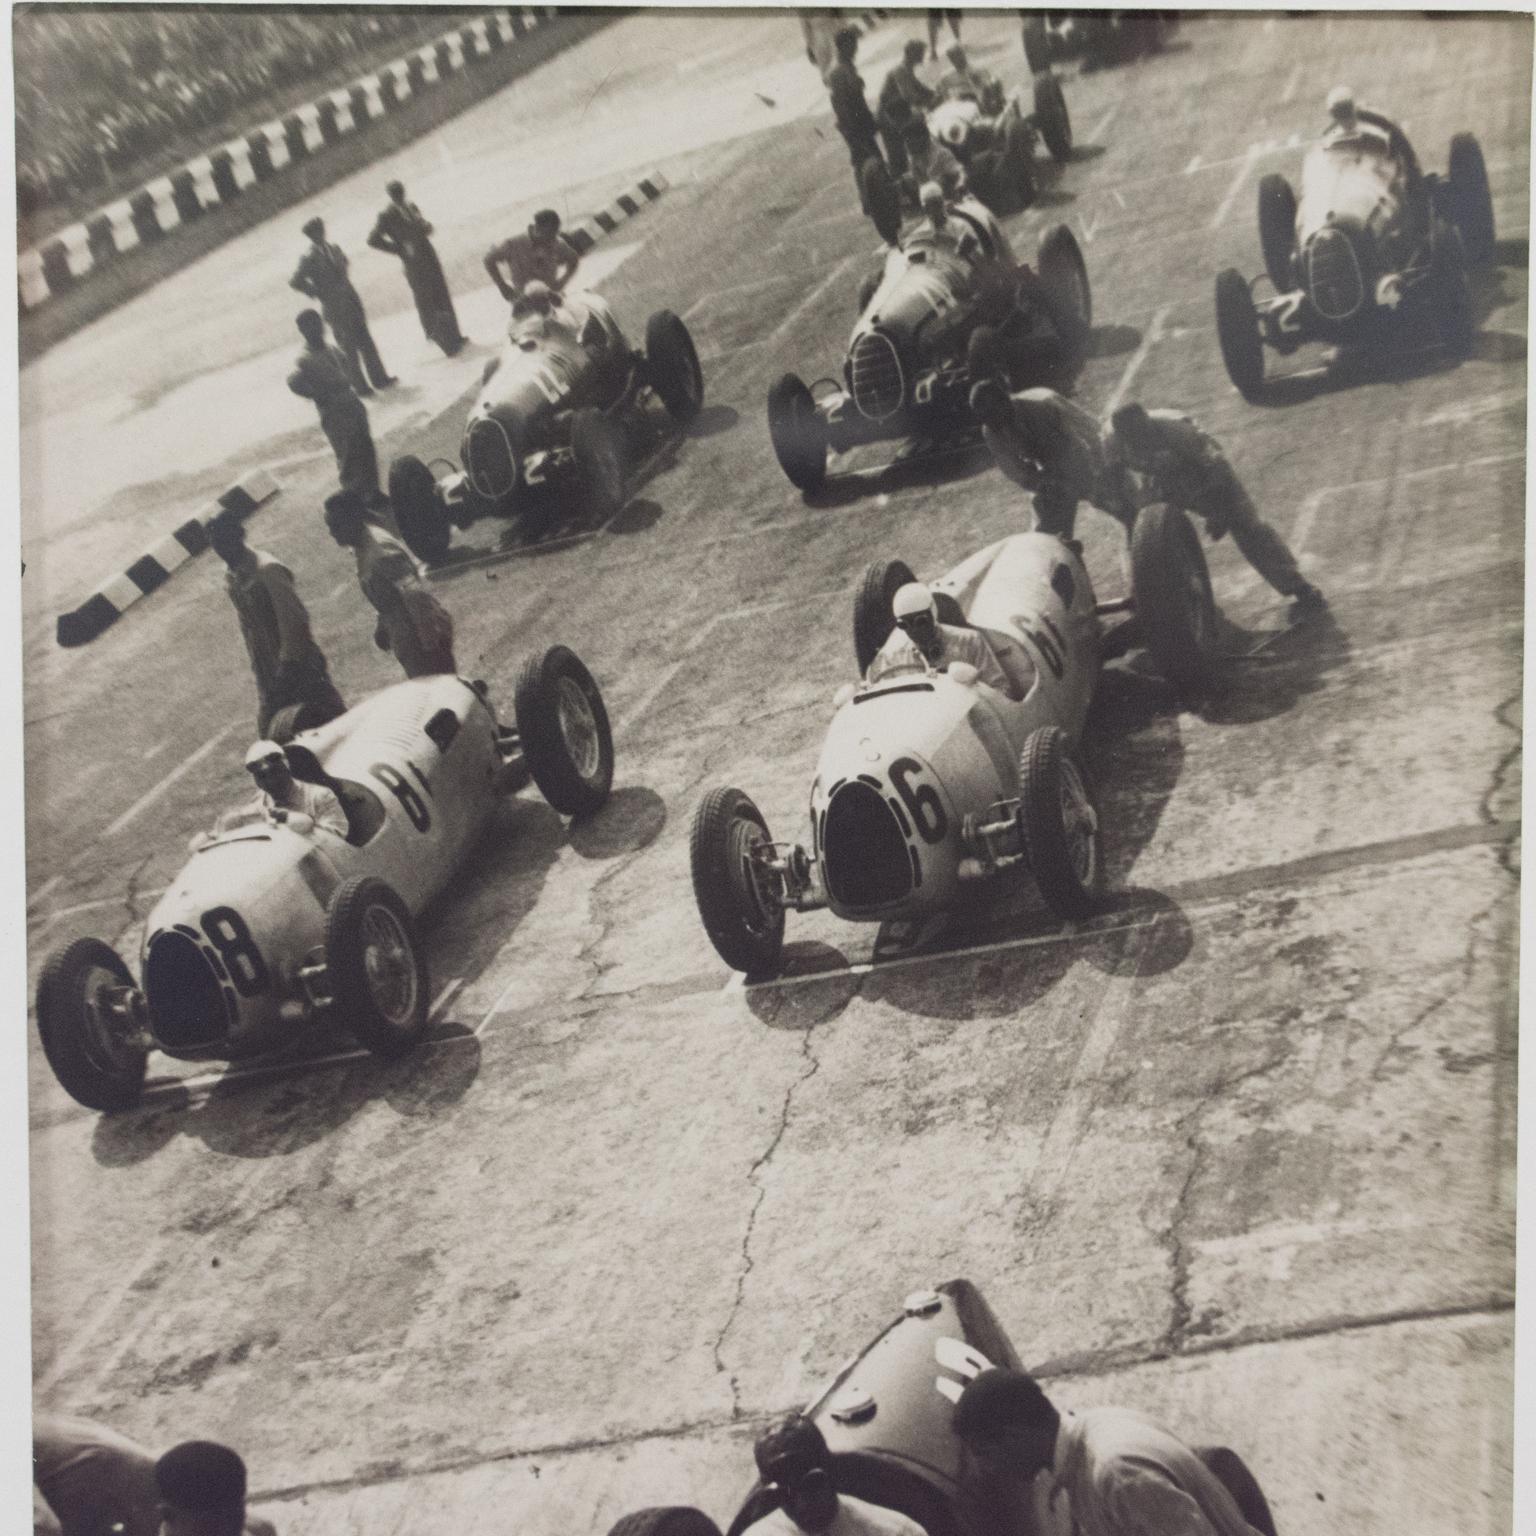 1936 Car Race in Monza Italy - Silver Gelatin Black & White Photograph Framed - Gray Black and White Photograph by Lauro Bordin